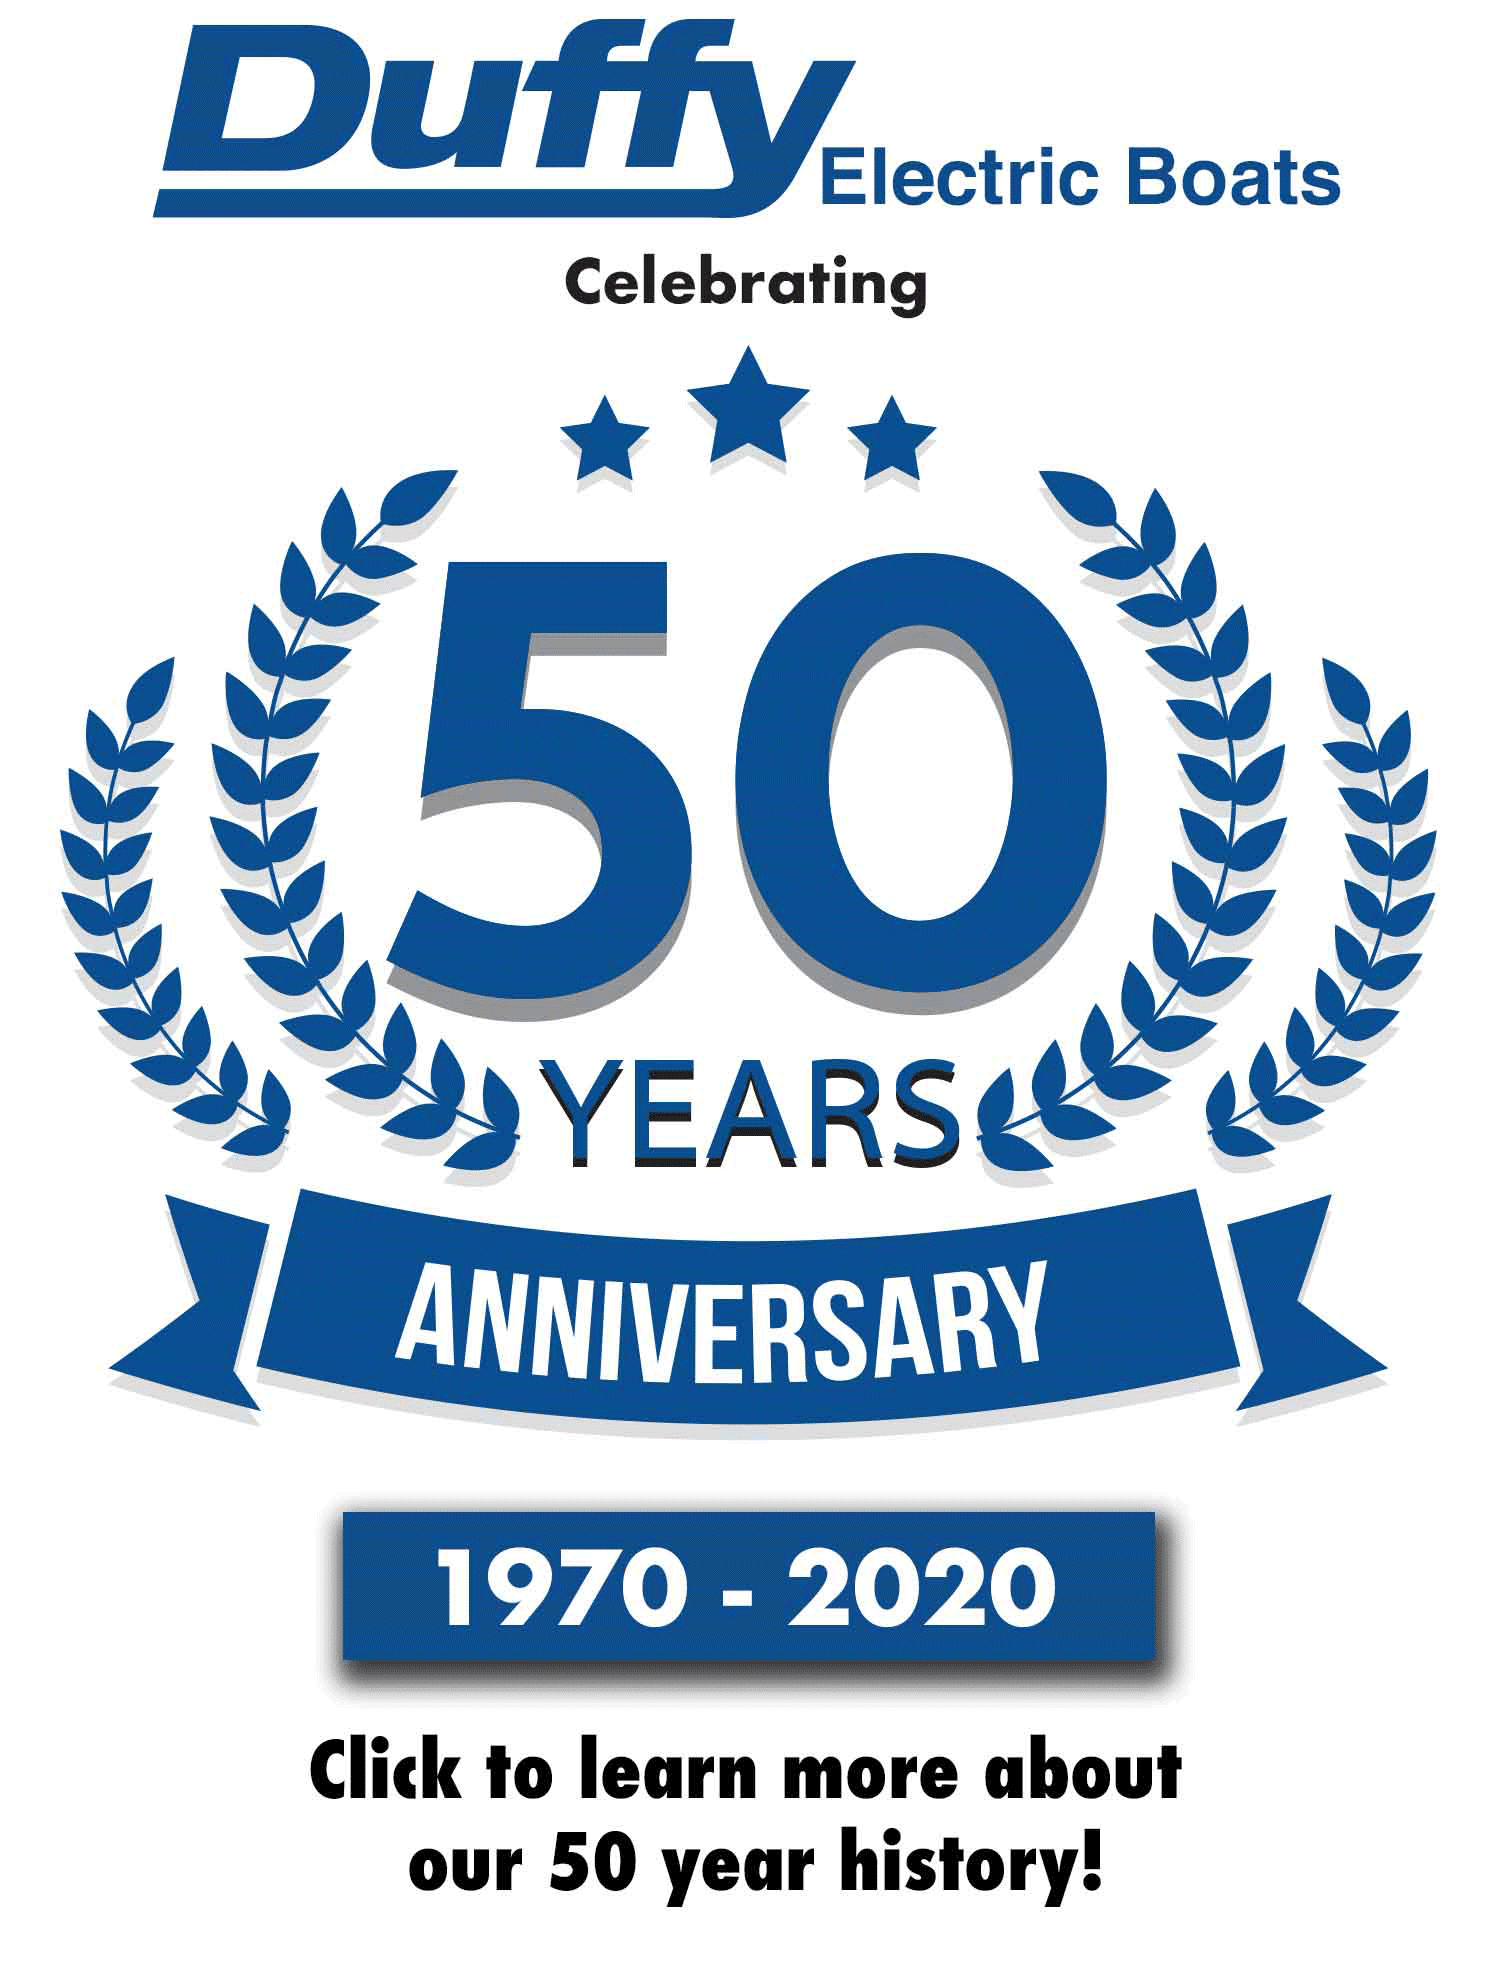 Duffy Electric Boats is celebrating its 50 year anniversary this year. 1970 to 2020.